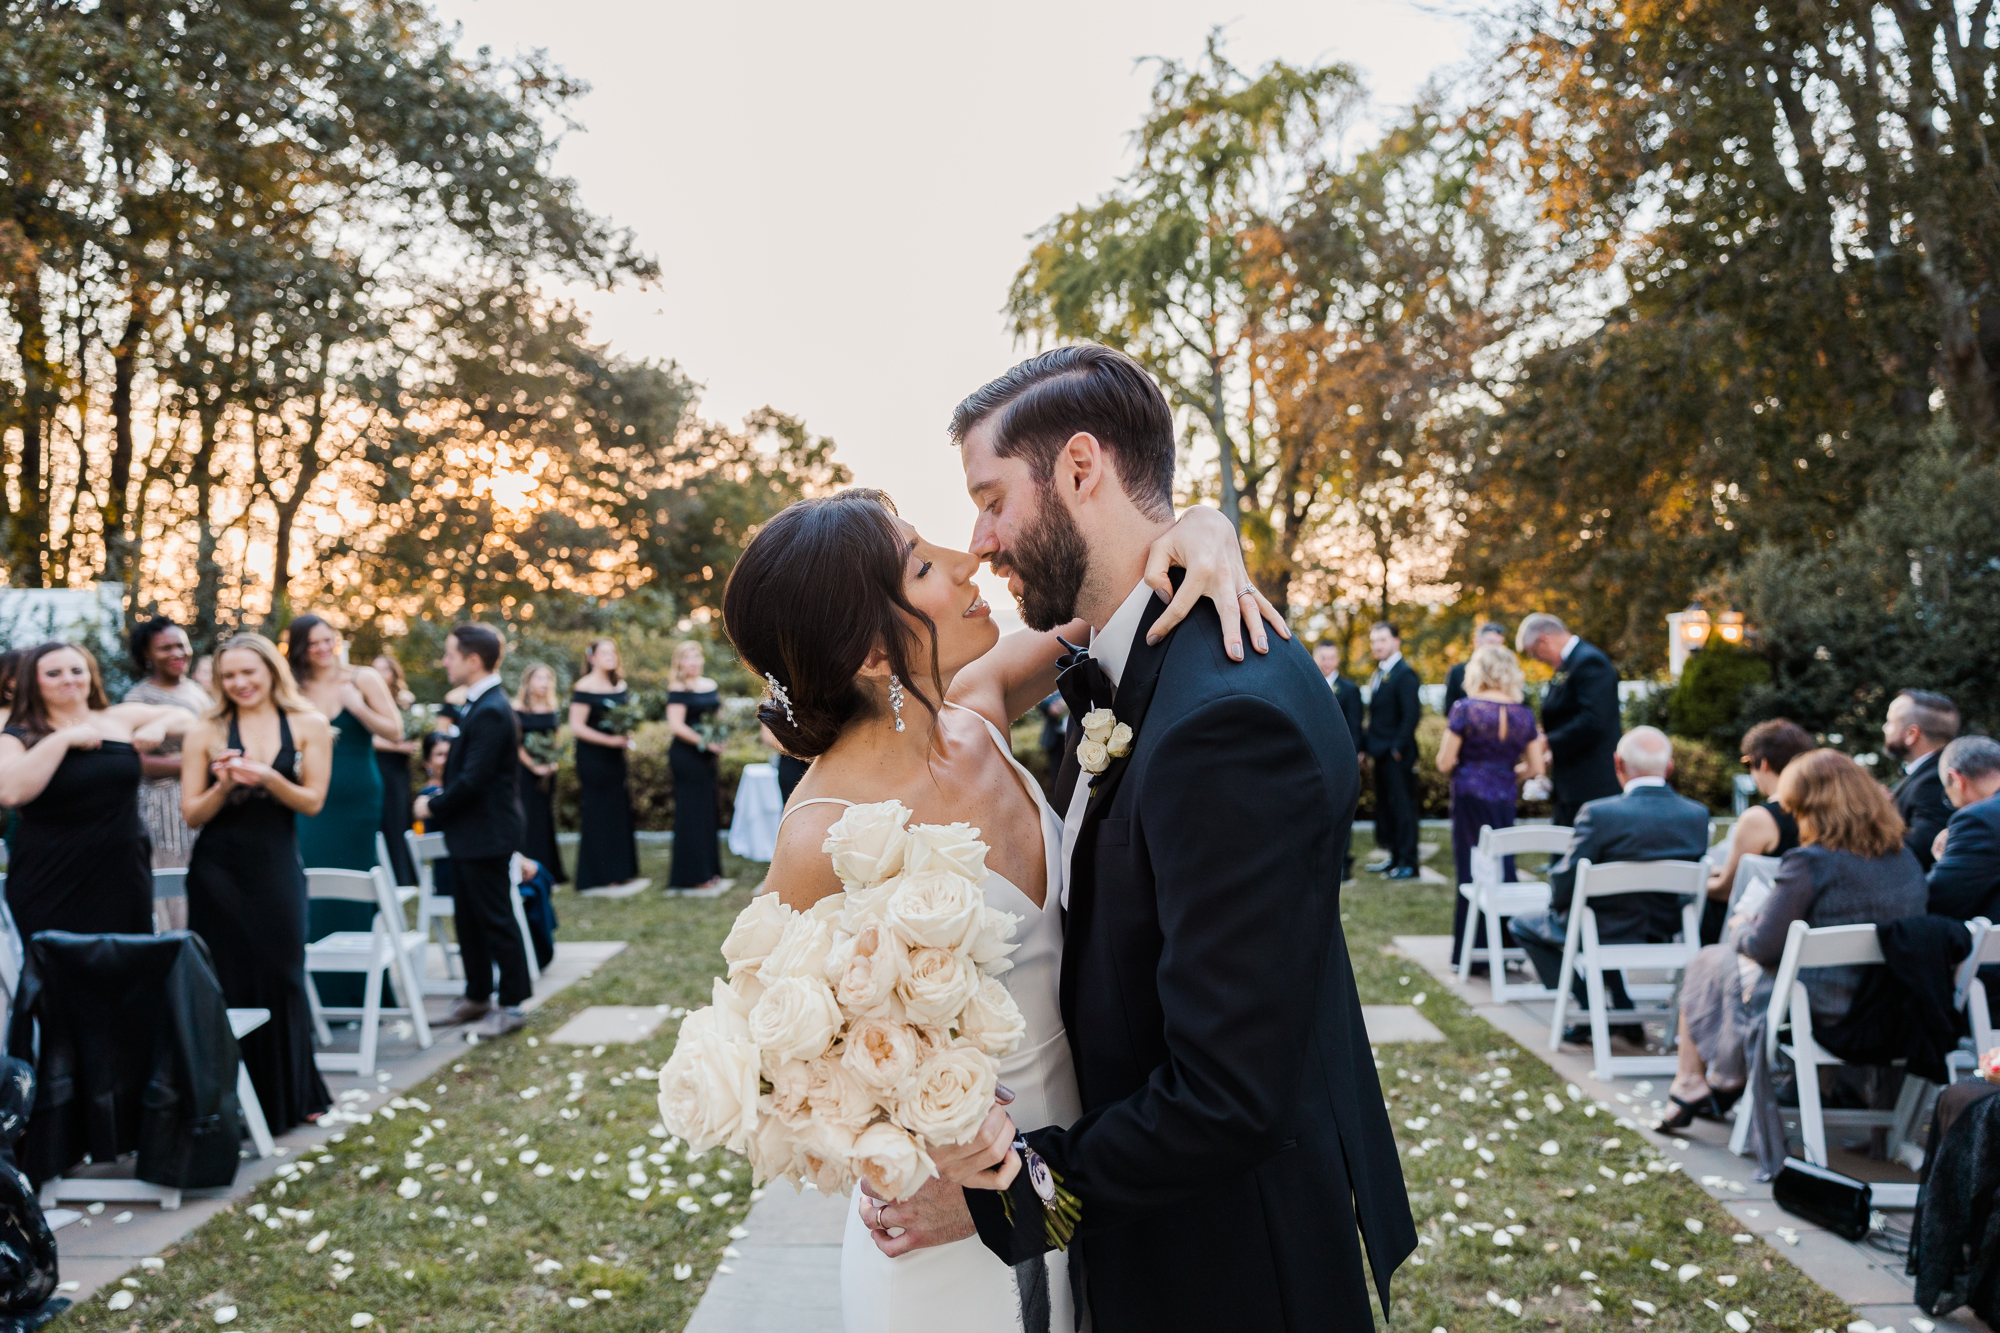 Touching Sunset Briarcliff Manor Wedding Photos in Autumn in Hudson Valley